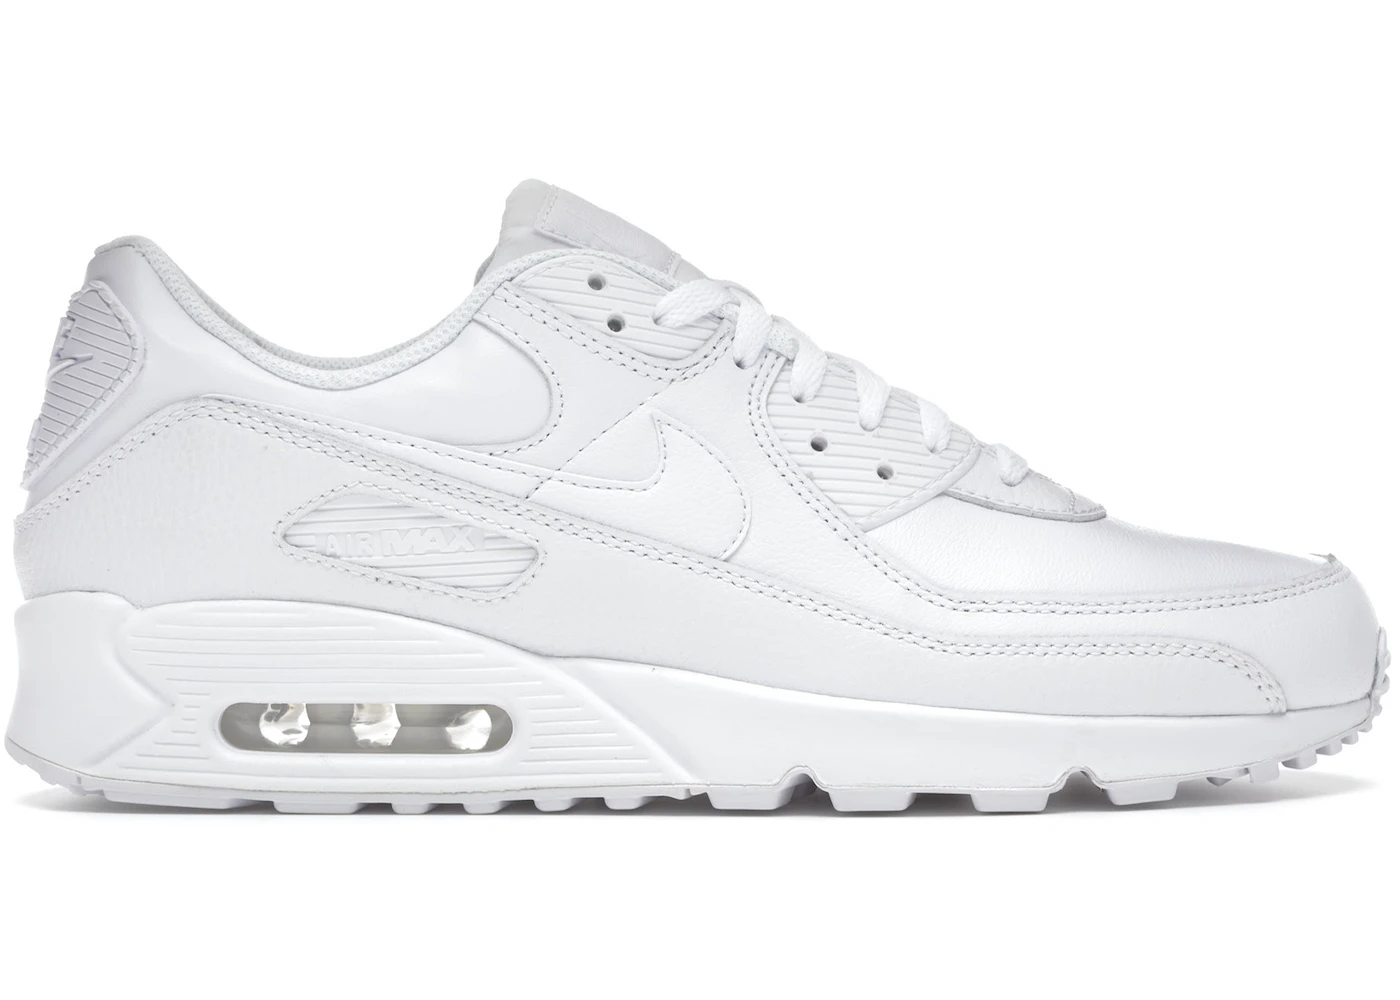 Nike Air Max 90 Leather White Men's - CZ5594-100 - US